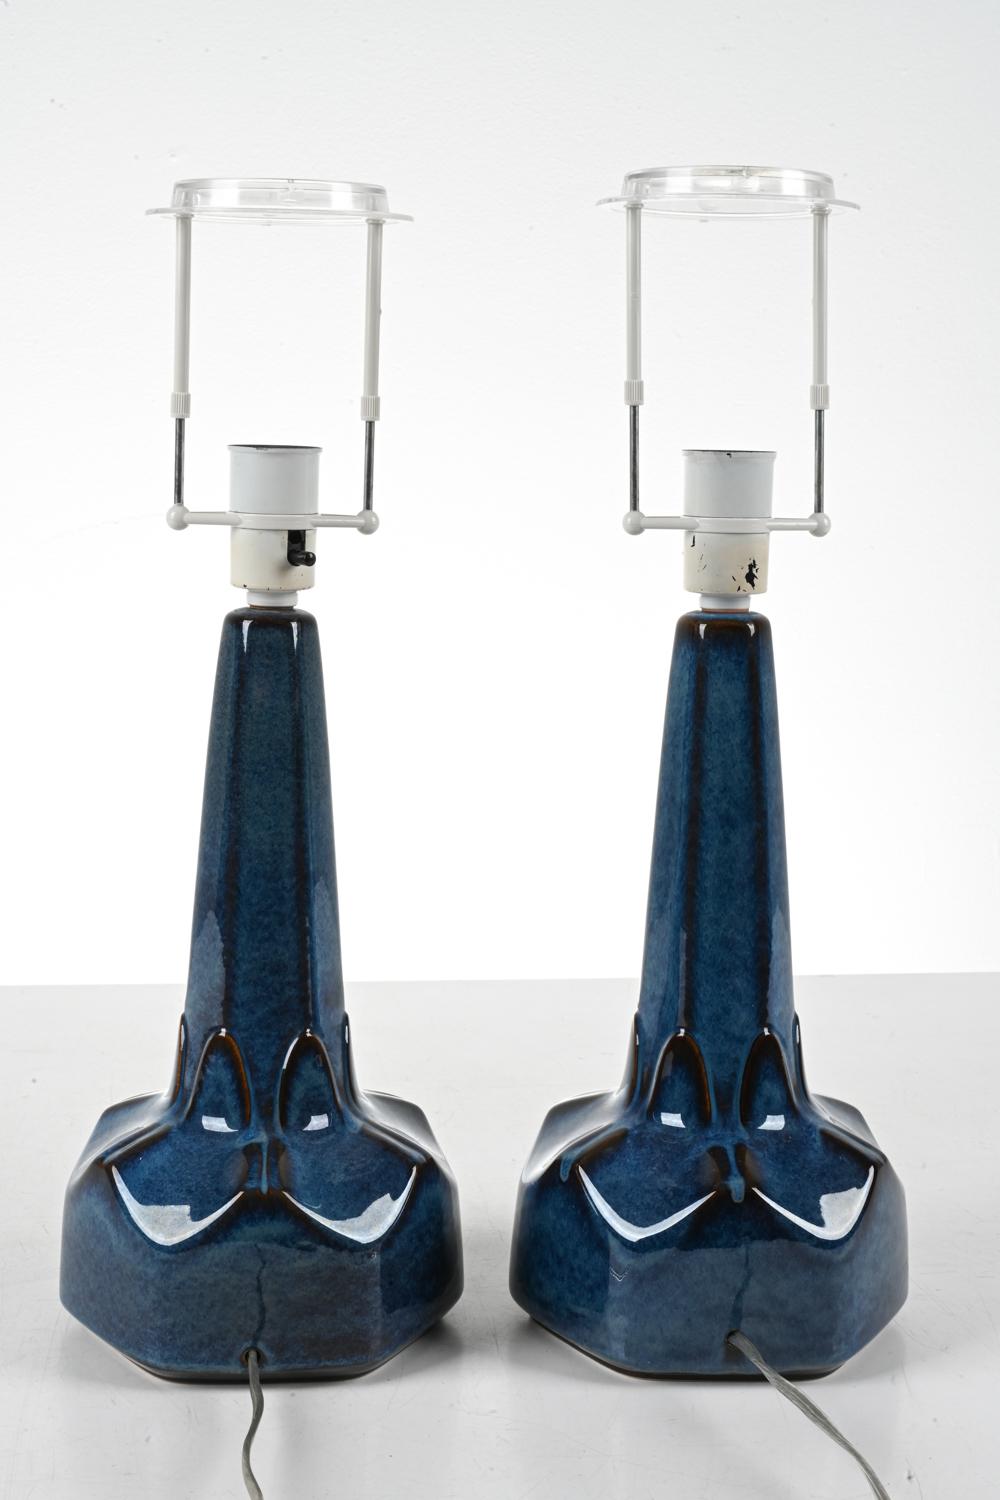 20th Century Pair Søholm Table Lamps, Dark Blue Stoneware, Denmark, 1960s For Sale